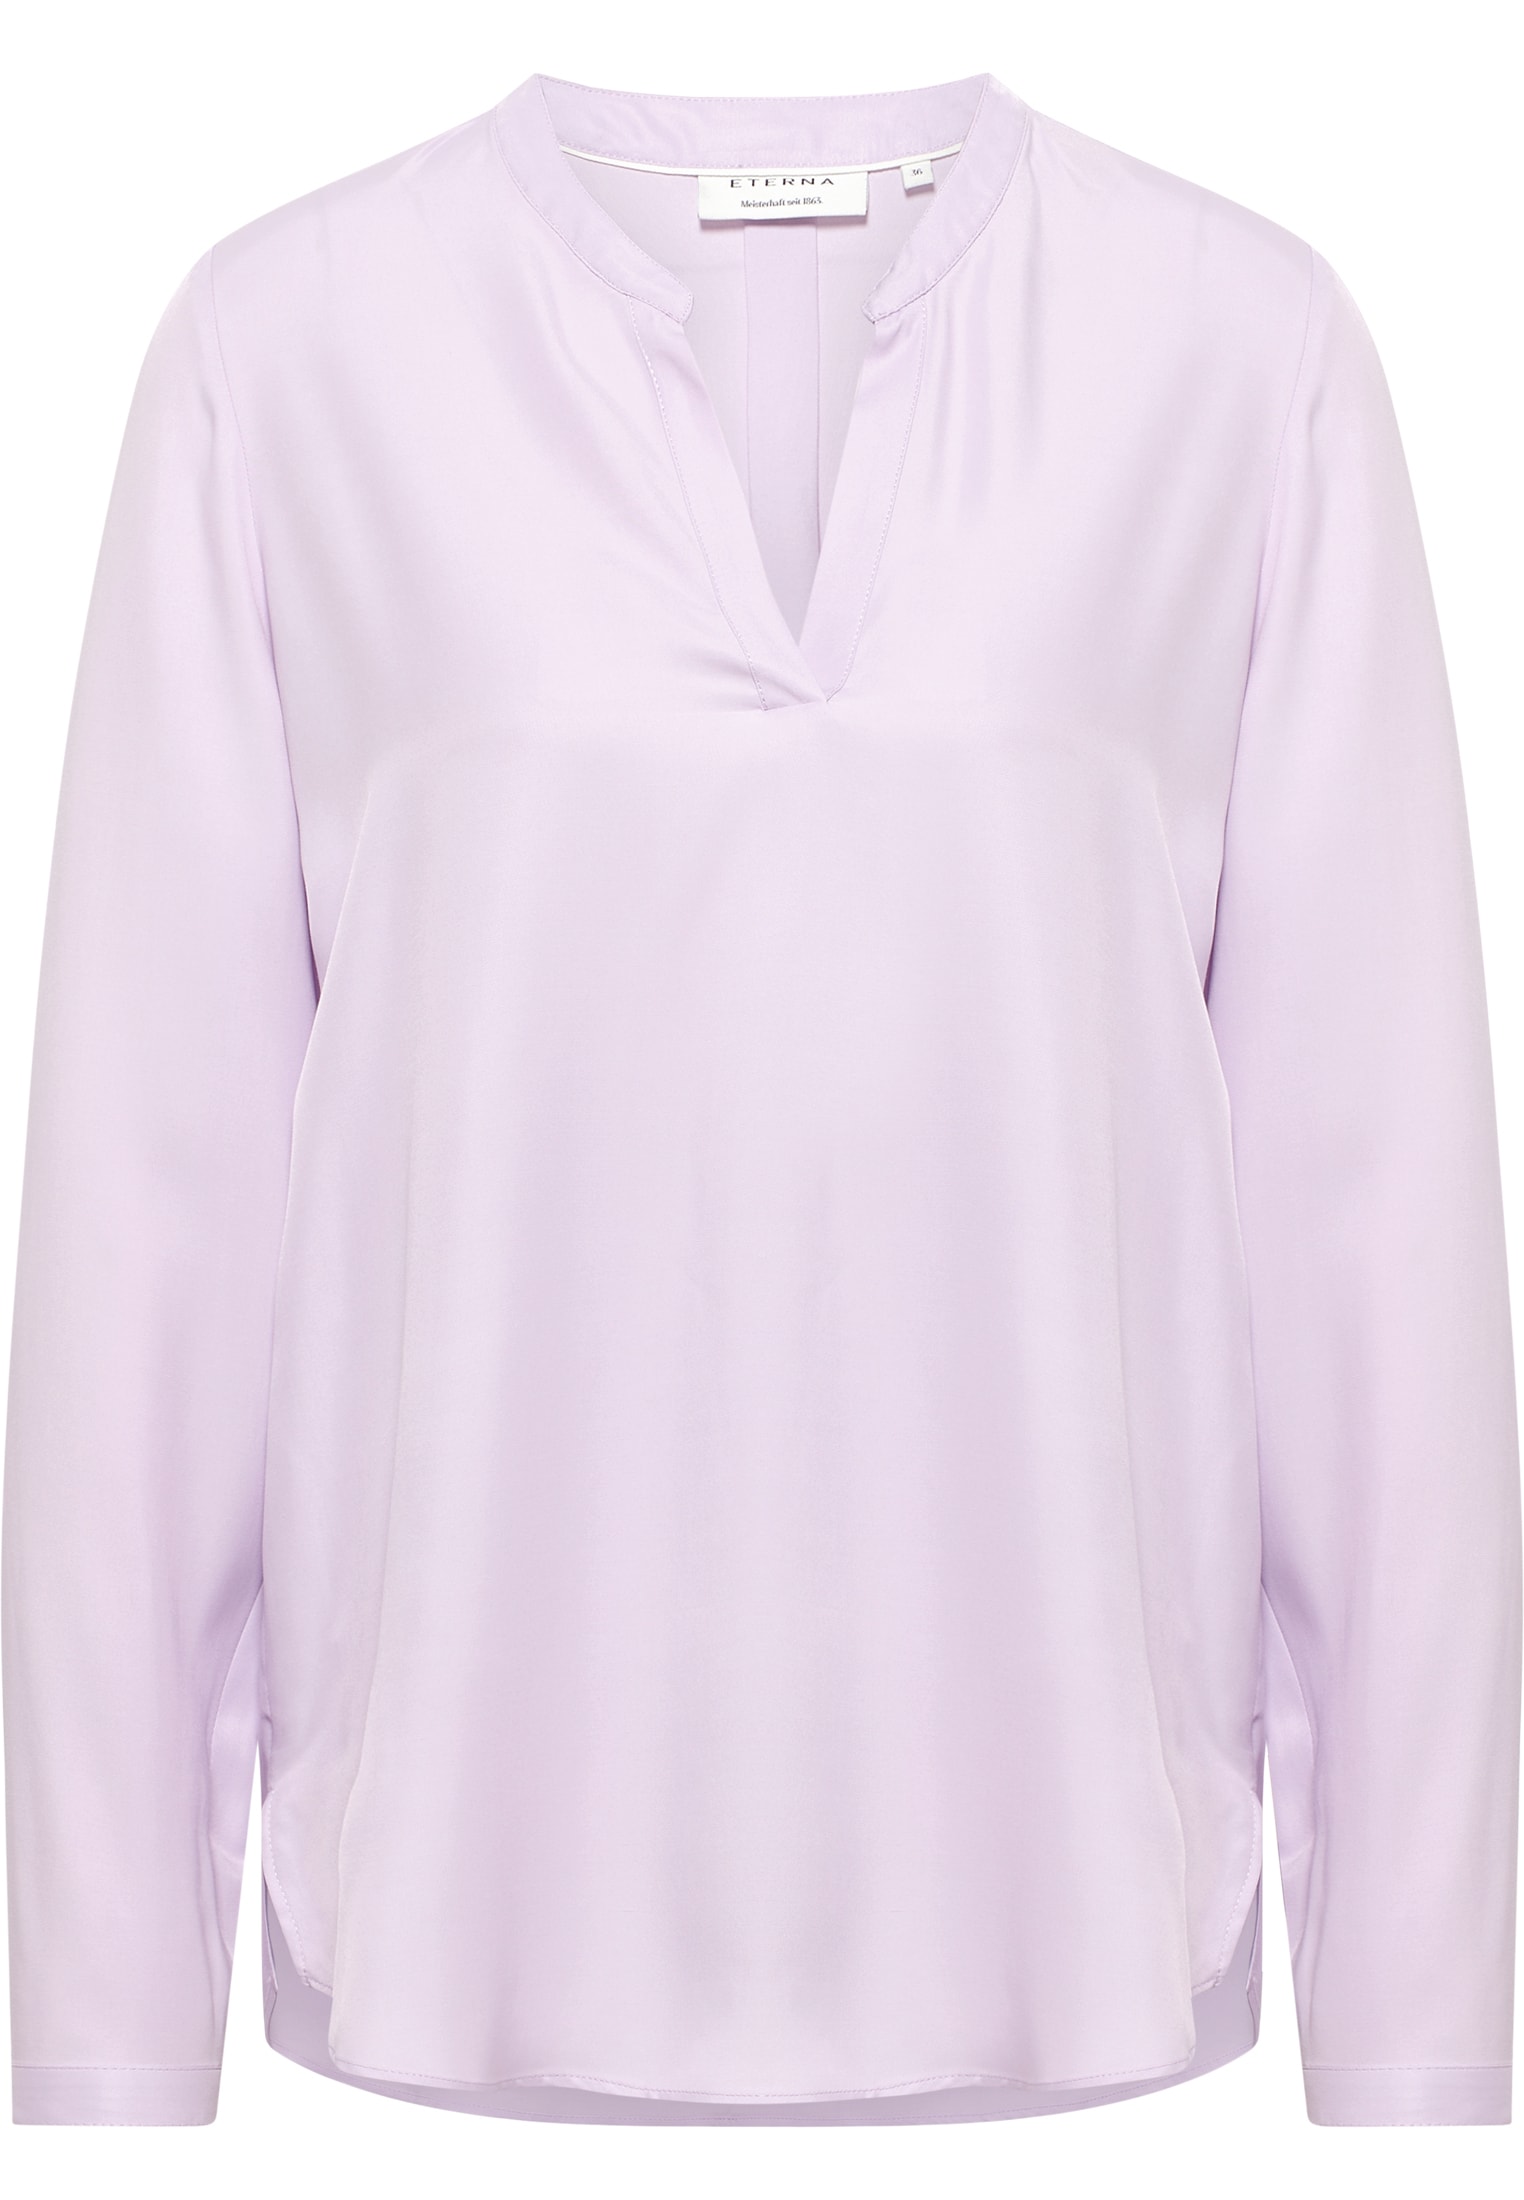 in orchid | unifarben | | 48 | Shirt Langarm 2BL04297-09-21-48-1/1 orchid Bluse Viscose